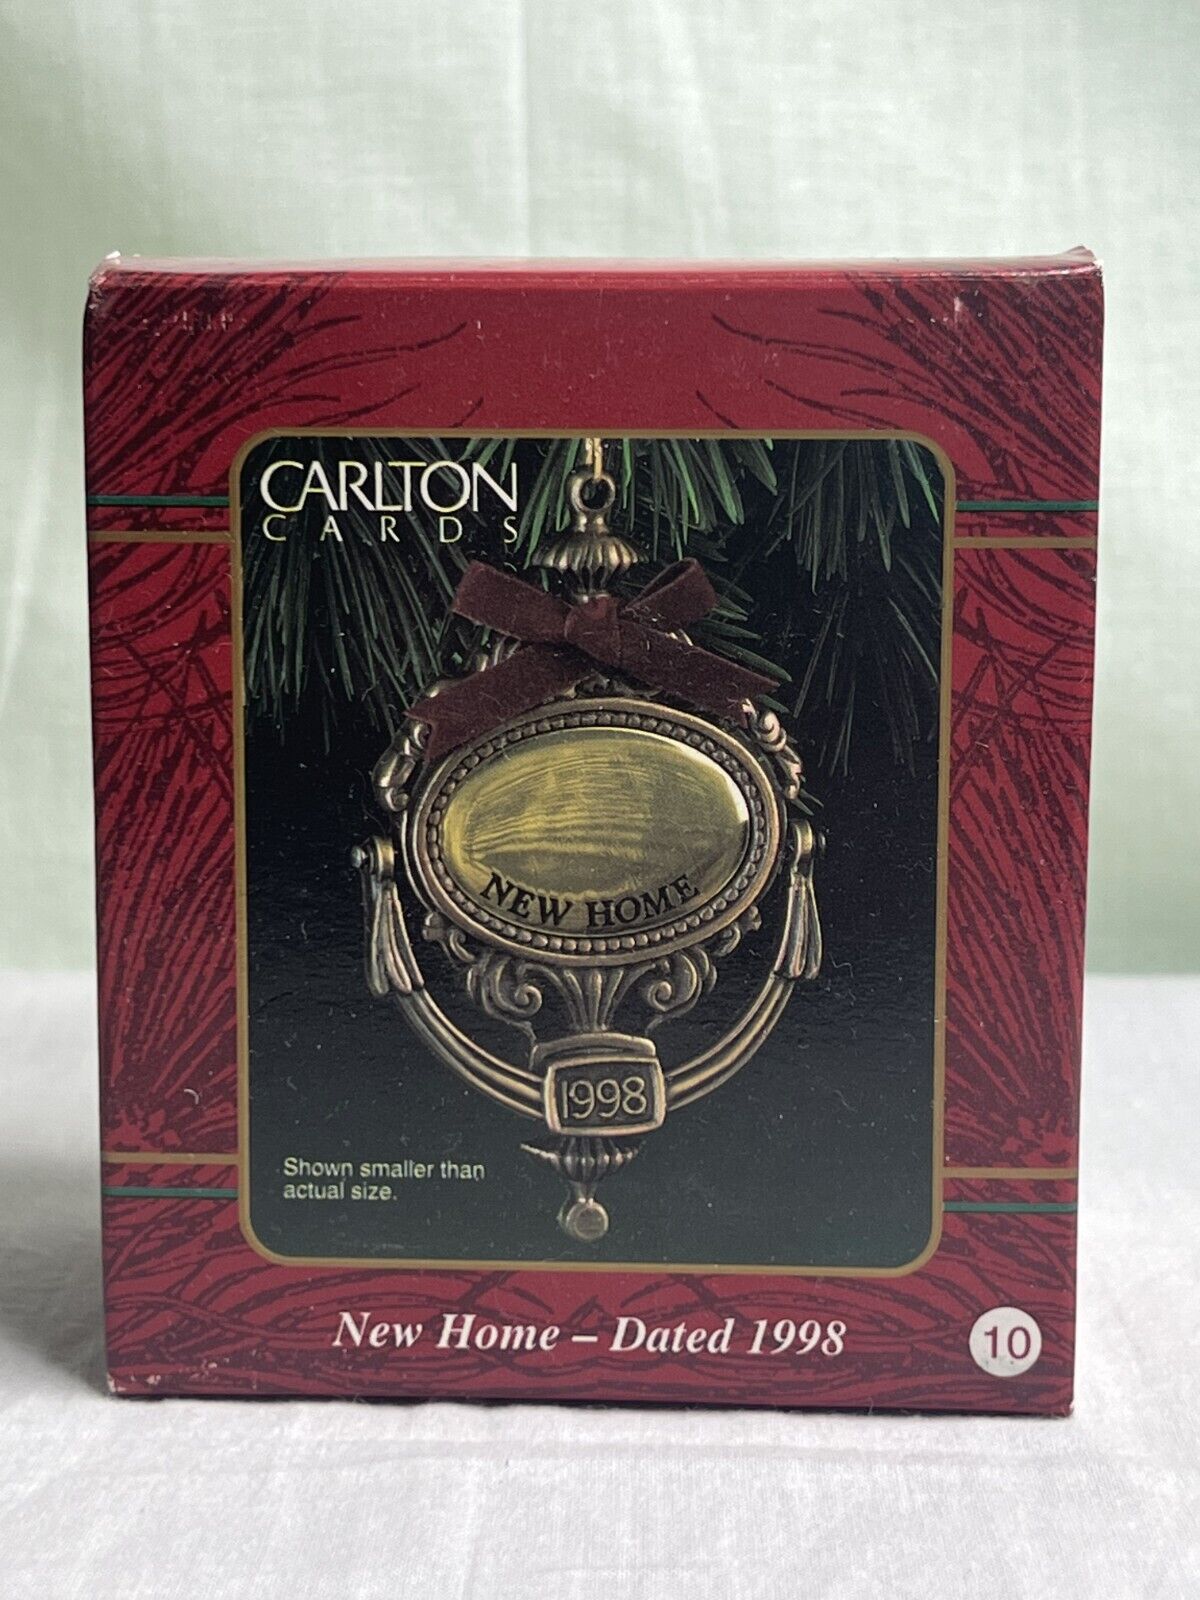 Vintage Carlton Cards New Home Dated 1998 Doorknocker Ornament FAST Shipping